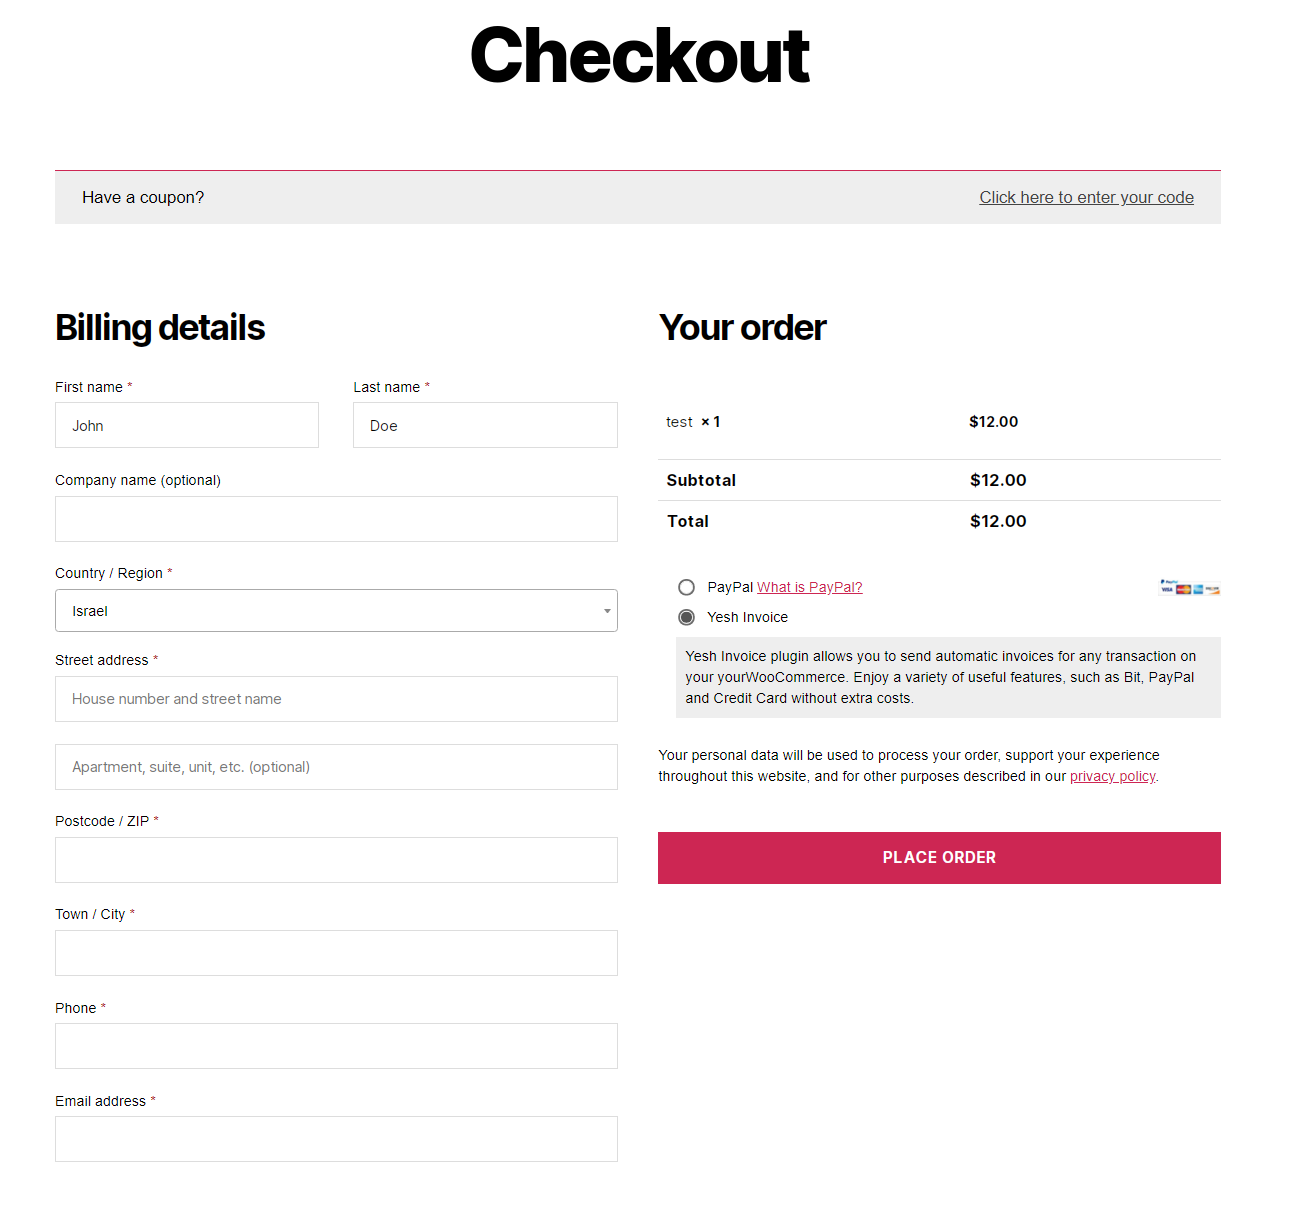 On checkout page select Yesh Invoice and Place Order